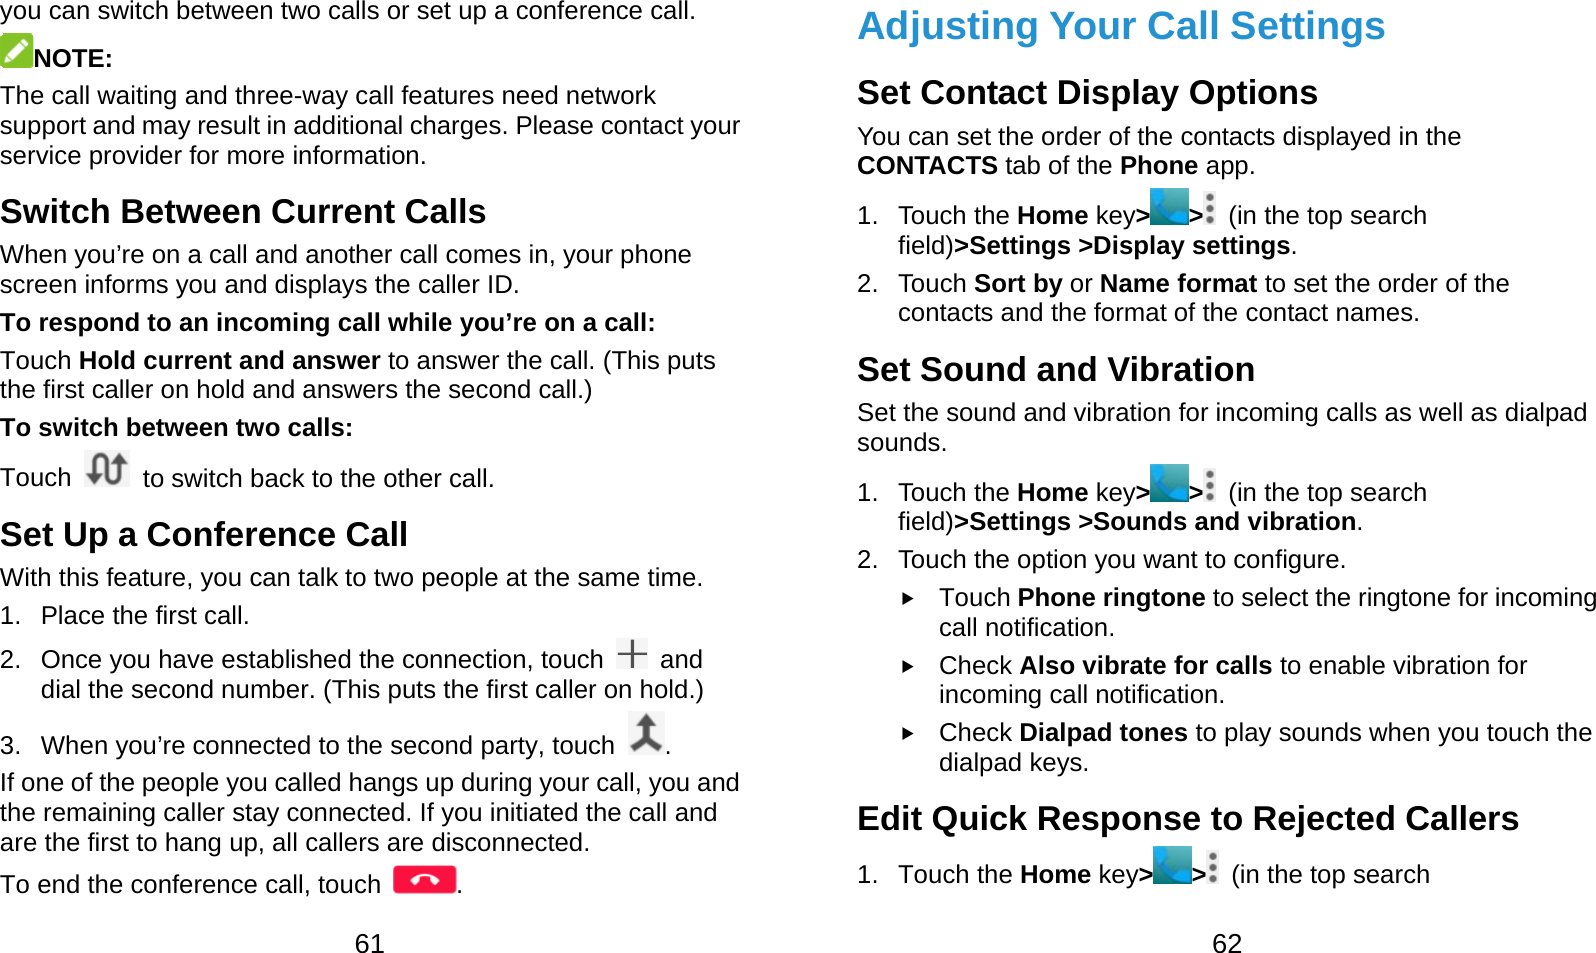  61 you can switch between two calls or set up a conference call.   NOTE: The call waiting and three-way call features need network support and may result in additional charges. Please contact your service provider for more information. Switch Between Current Calls When you’re on a call and another call comes in, your phone screen informs you and displays the caller ID. To respond to an incoming call while you’re on a call: Touch Hold current and answer to answer the call. (This puts the first caller on hold and answers the second call.) To switch between two calls: Touch    to switch back to the other call. Set Up a Conference Call With this feature, you can talk to two people at the same time. 1.  Place the first call. 2.  Once you have established the connection, touch   and dial the second number. (This puts the first caller on hold.) 3.  When you’re connected to the second party, touch  . If one of the people you called hangs up during your call, you and the remaining caller stay connected. If you initiated the call and are the first to hang up, all callers are disconnected. To end the conference call, touch  .  62 Adjusting Your Call Settings Set Contact Display Options You can set the order of the contacts displayed in the CONTACTS tab of the Phone app. 1. Touch the Home key&gt;&gt;  (in the top search field)&gt;Settings &gt;Display settings. 2. Touch Sort by or Name format to set the order of the contacts and the format of the contact names. Set Sound and Vibration Set the sound and vibration for incoming calls as well as dialpad sounds. 1. Touch the Home key&gt;&gt;  (in the top search field)&gt;Settings &gt;Sounds and vibration. 2.  Touch the option you want to configure.  Touch Phone ringtone to select the ringtone for incoming call notification.  Check Also vibrate for calls to enable vibration for incoming call notification.  Check Dialpad tones to play sounds when you touch the dialpad keys. Edit Quick Response to Rejected Callers 1. Touch the Home key&gt; &gt;   (in the top search 